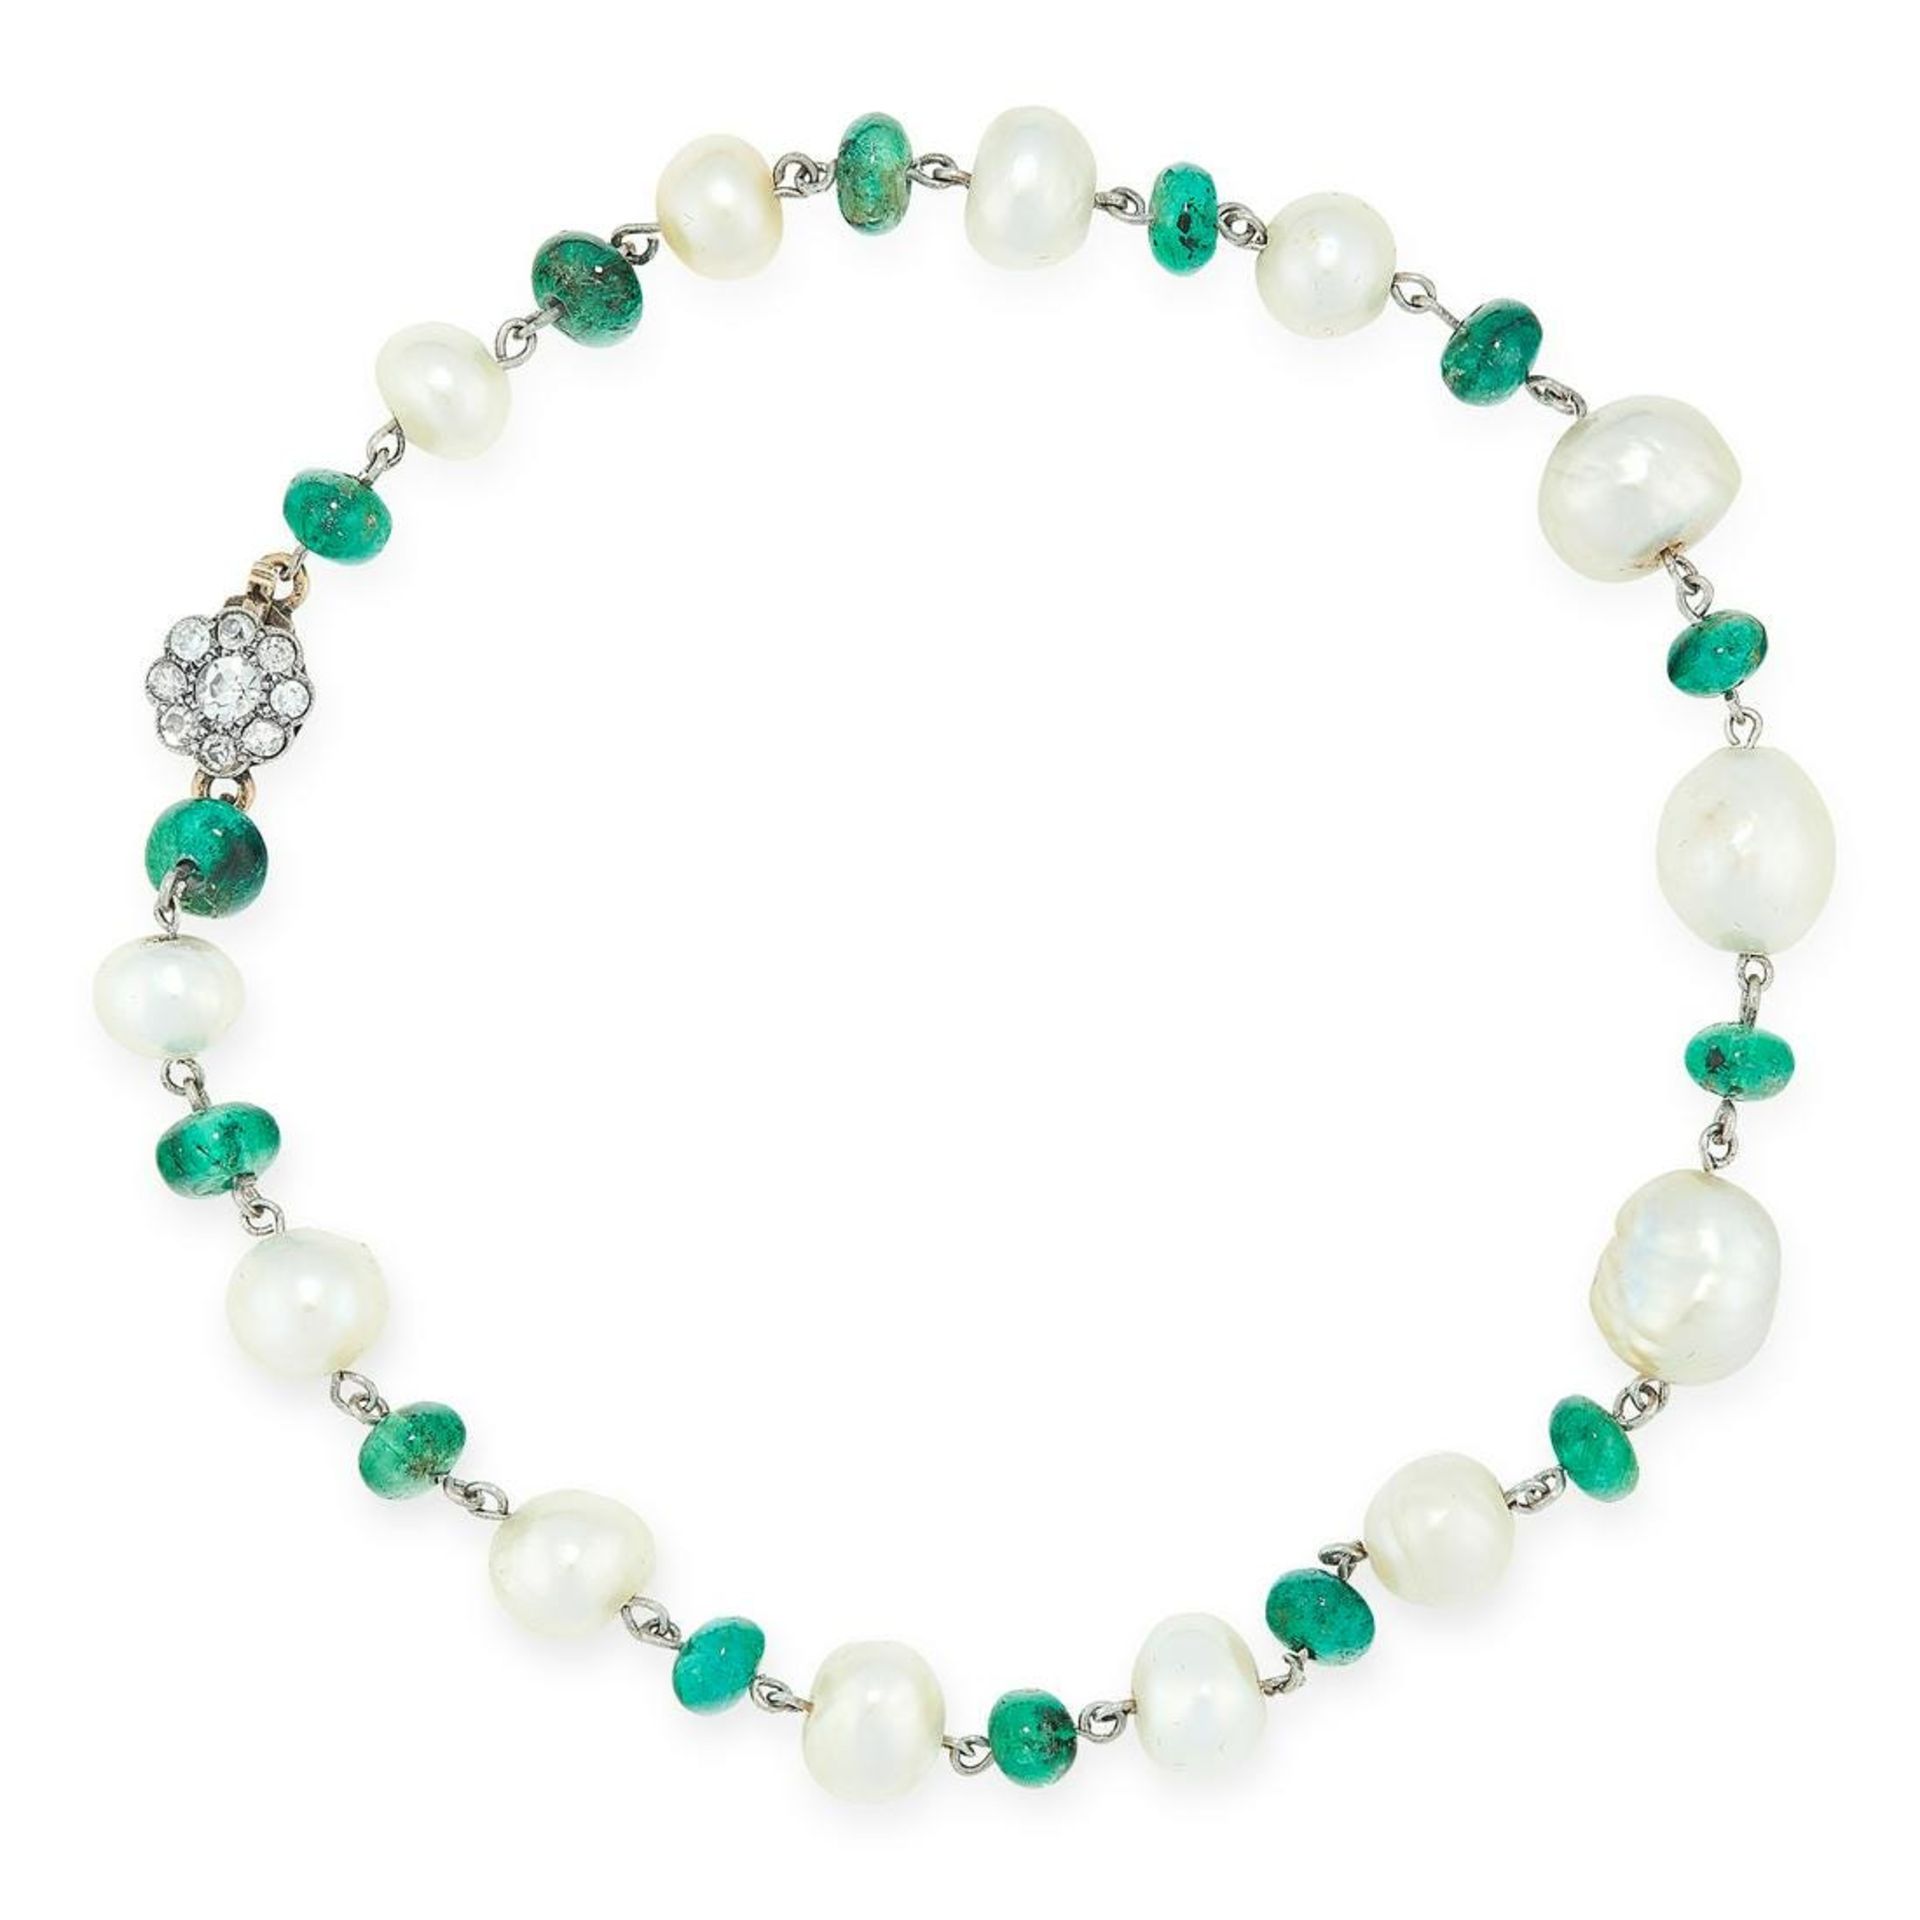 NATURAL PEARL, EMERALD AND DIAMOND BRACELET in yellow gold and silver, comprising a row of